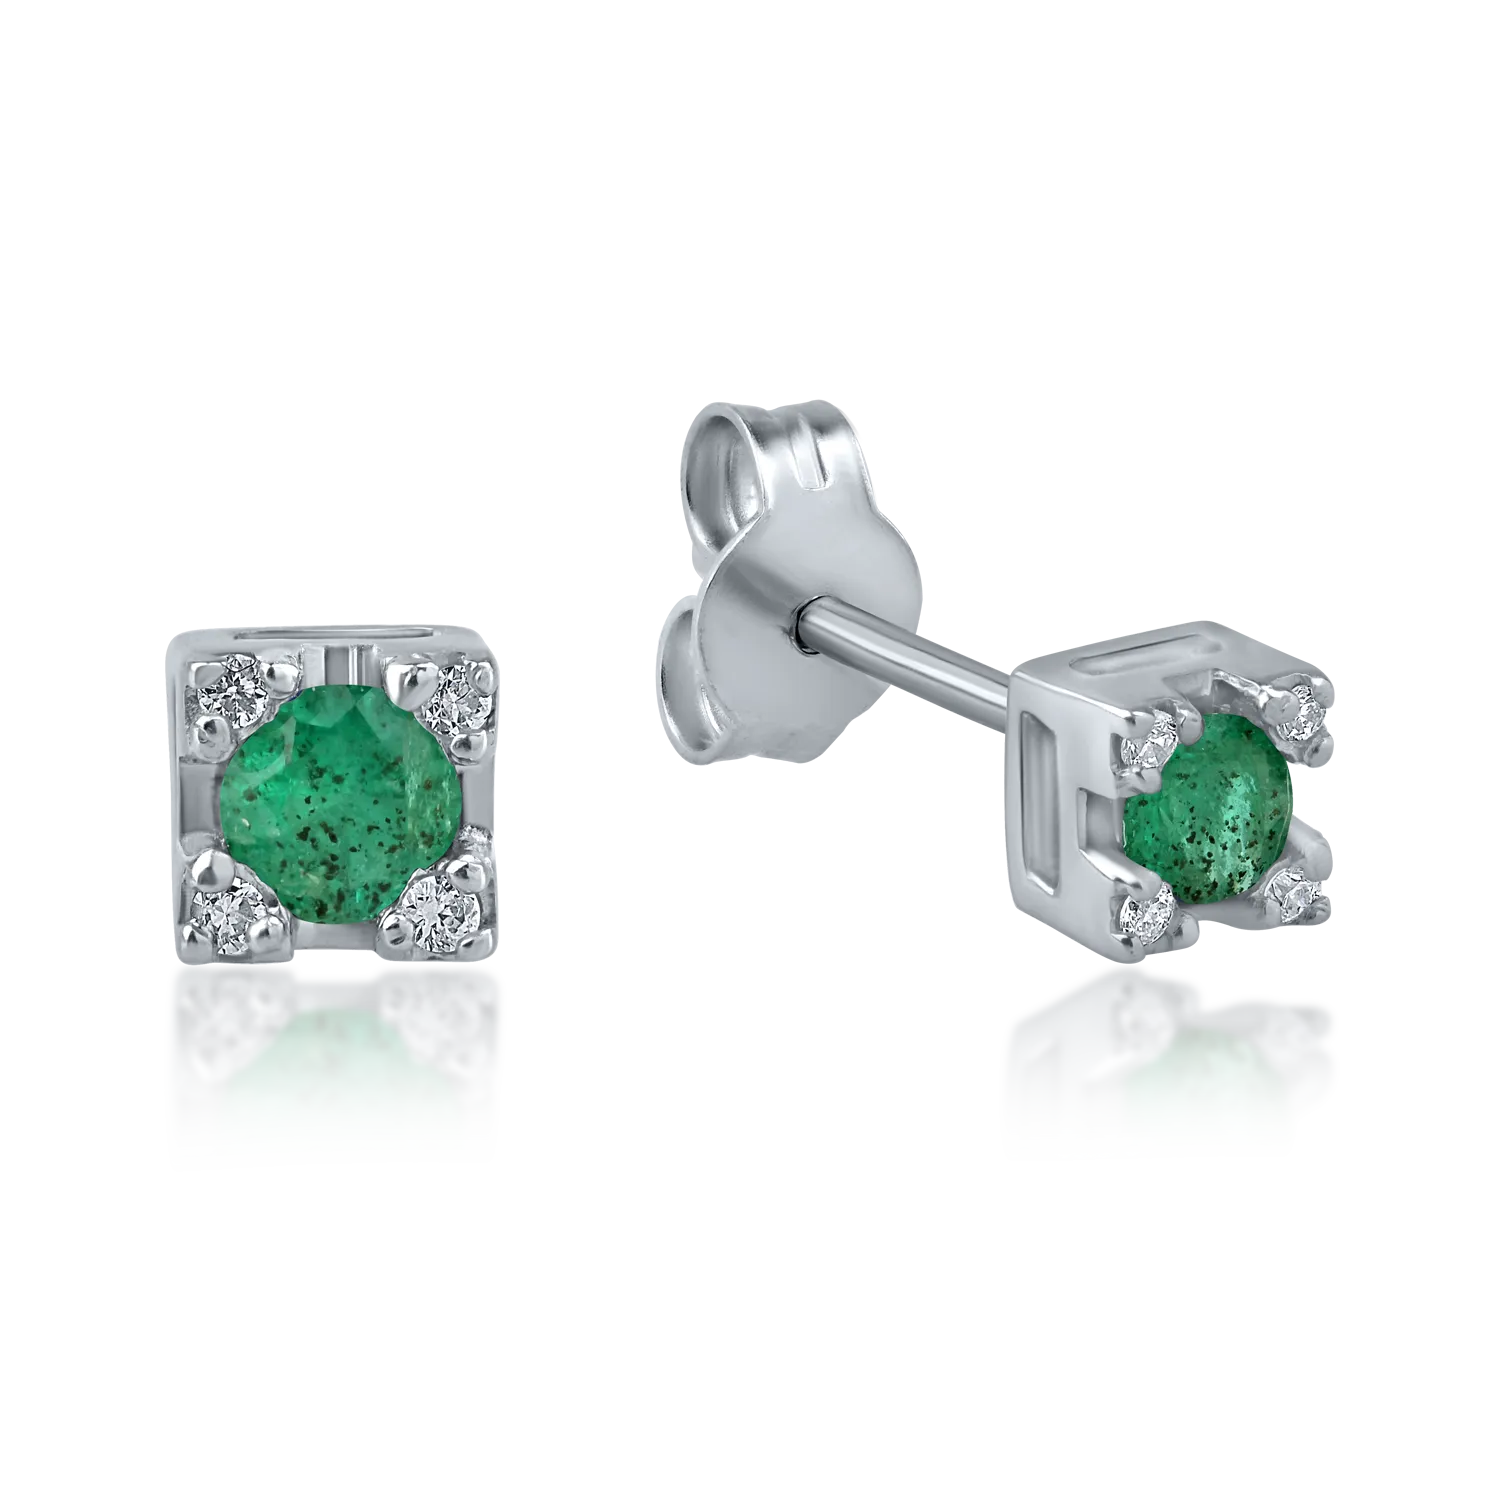 White gold earrings with 0.19ct emeralds and 0.03ct diamonds